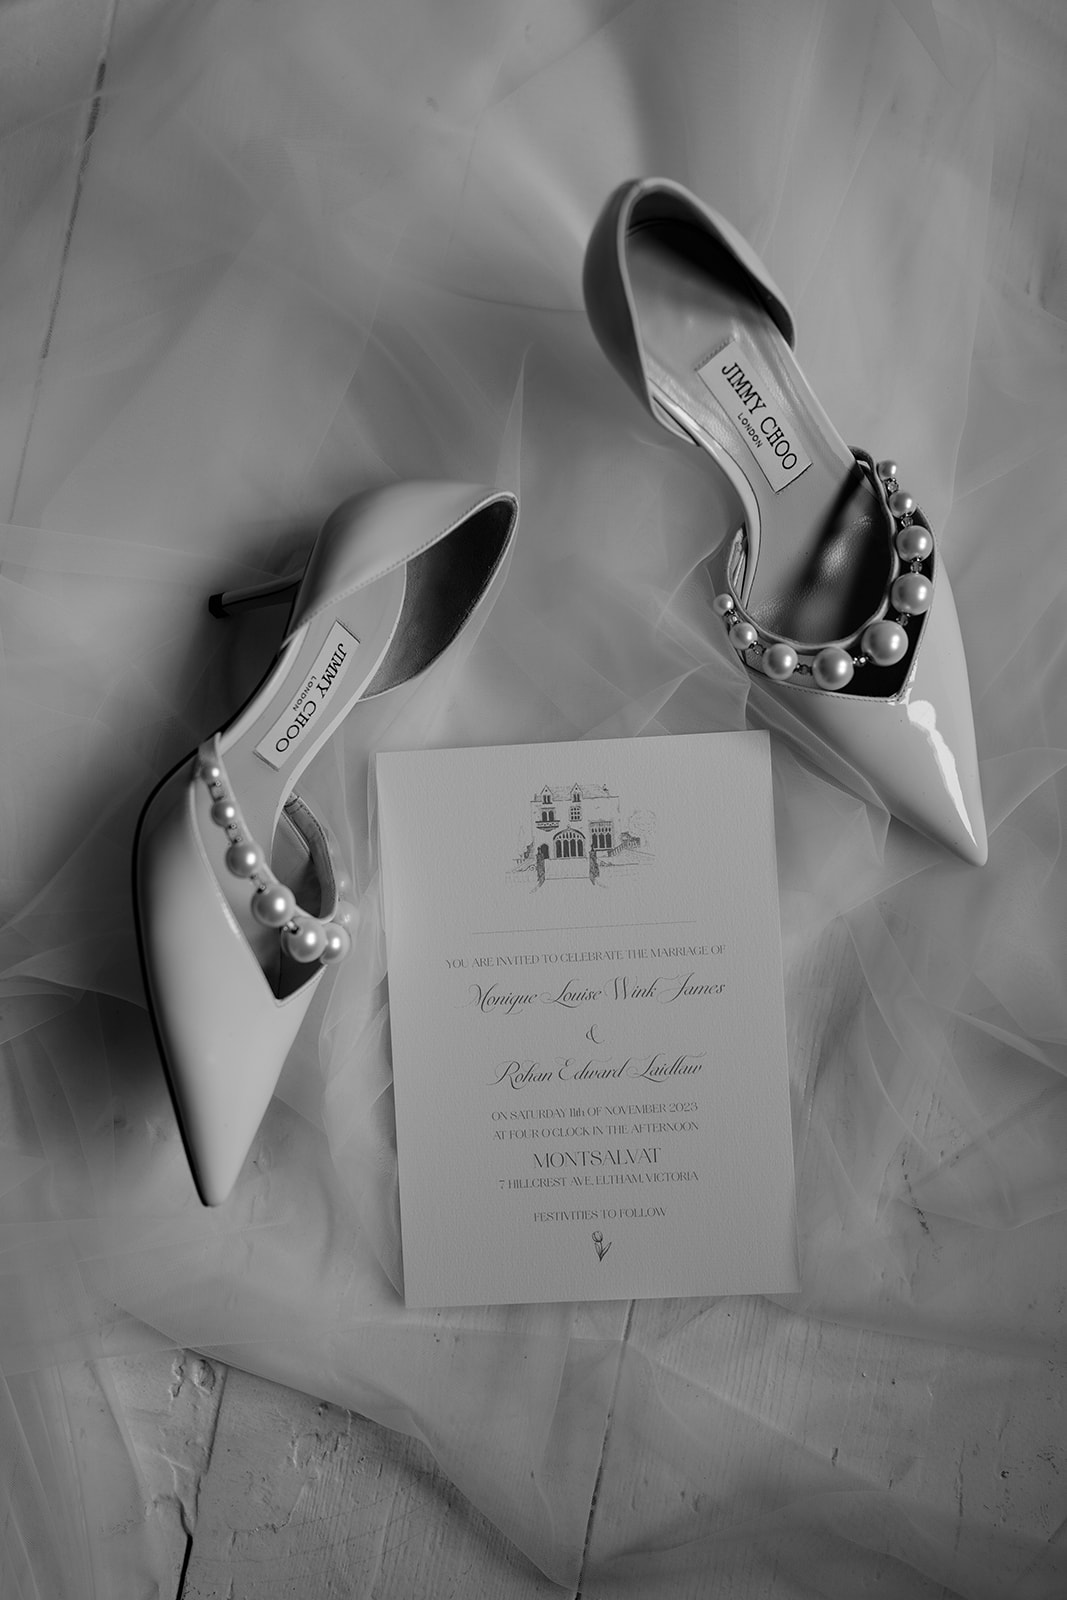 Close-up of elegant wedding shoes with intricate details, ready for a bride's special day at Montsalvat wedding venue.